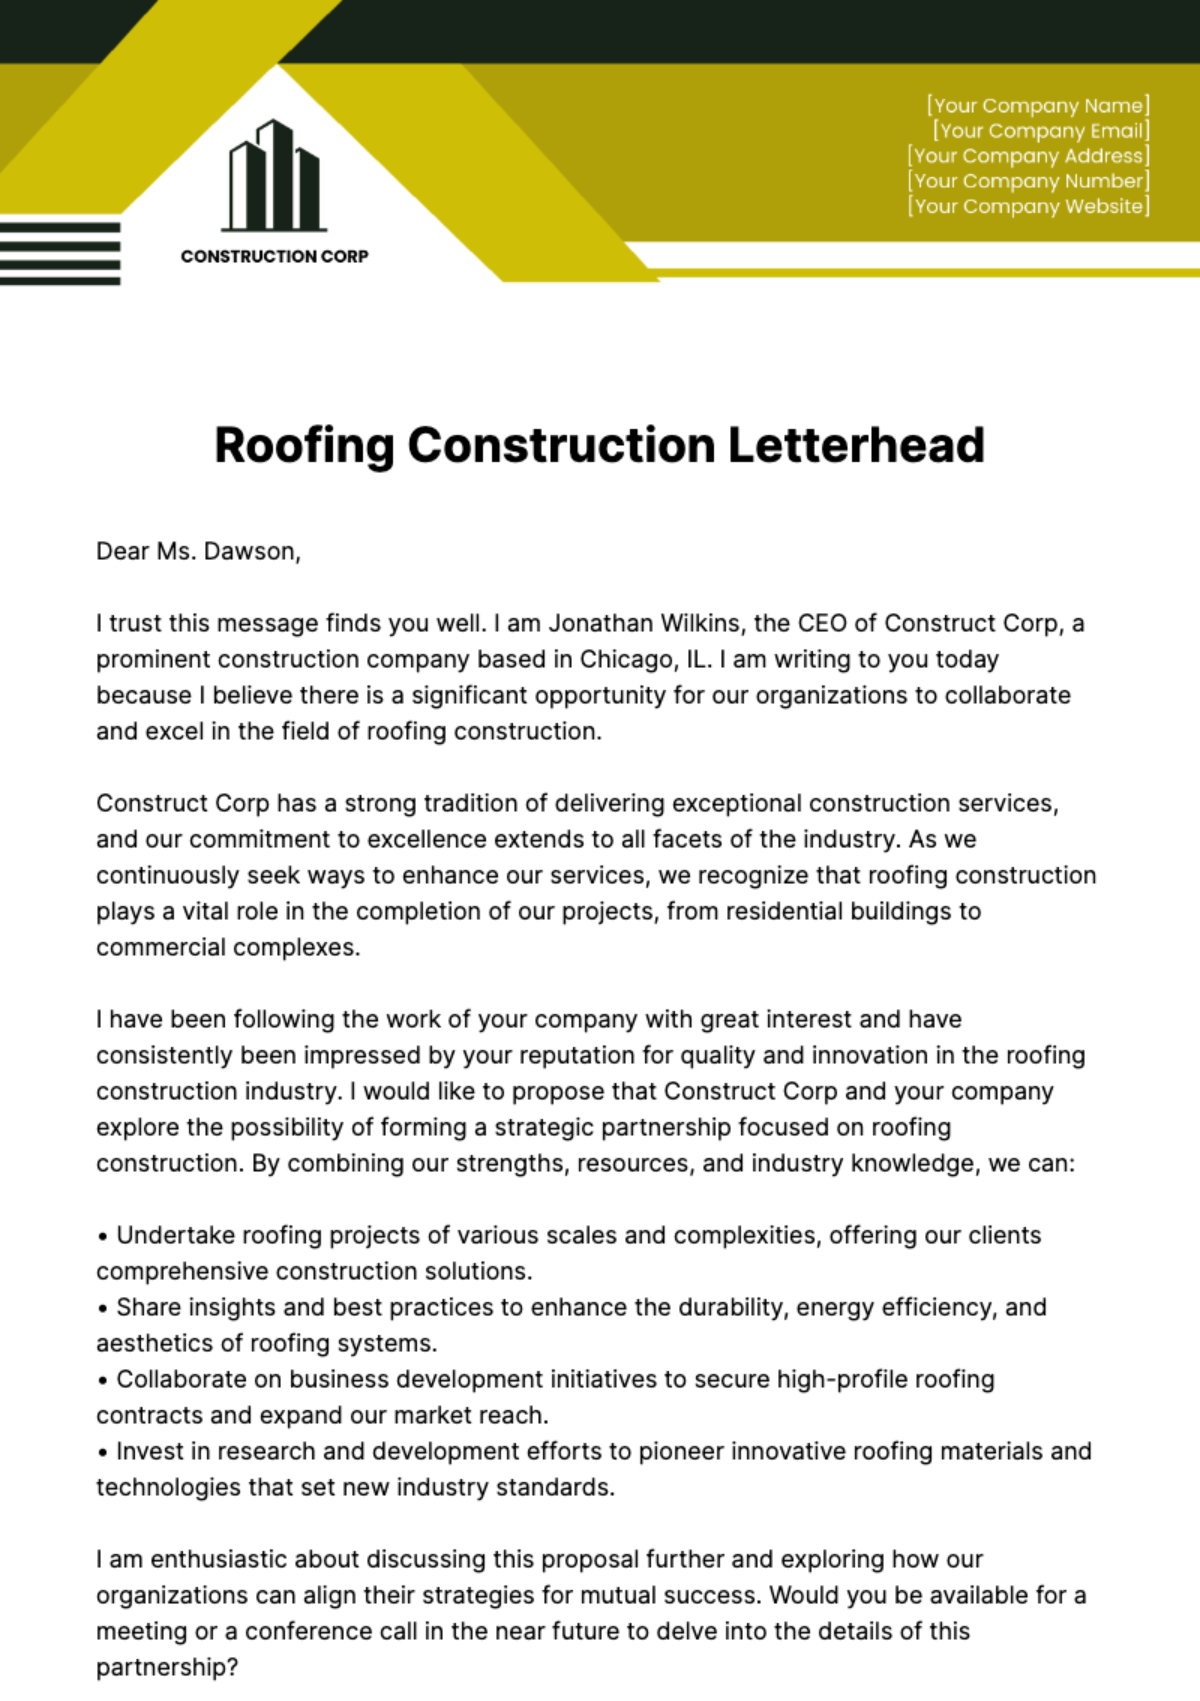 Free Roofing Construction Letterhead Template